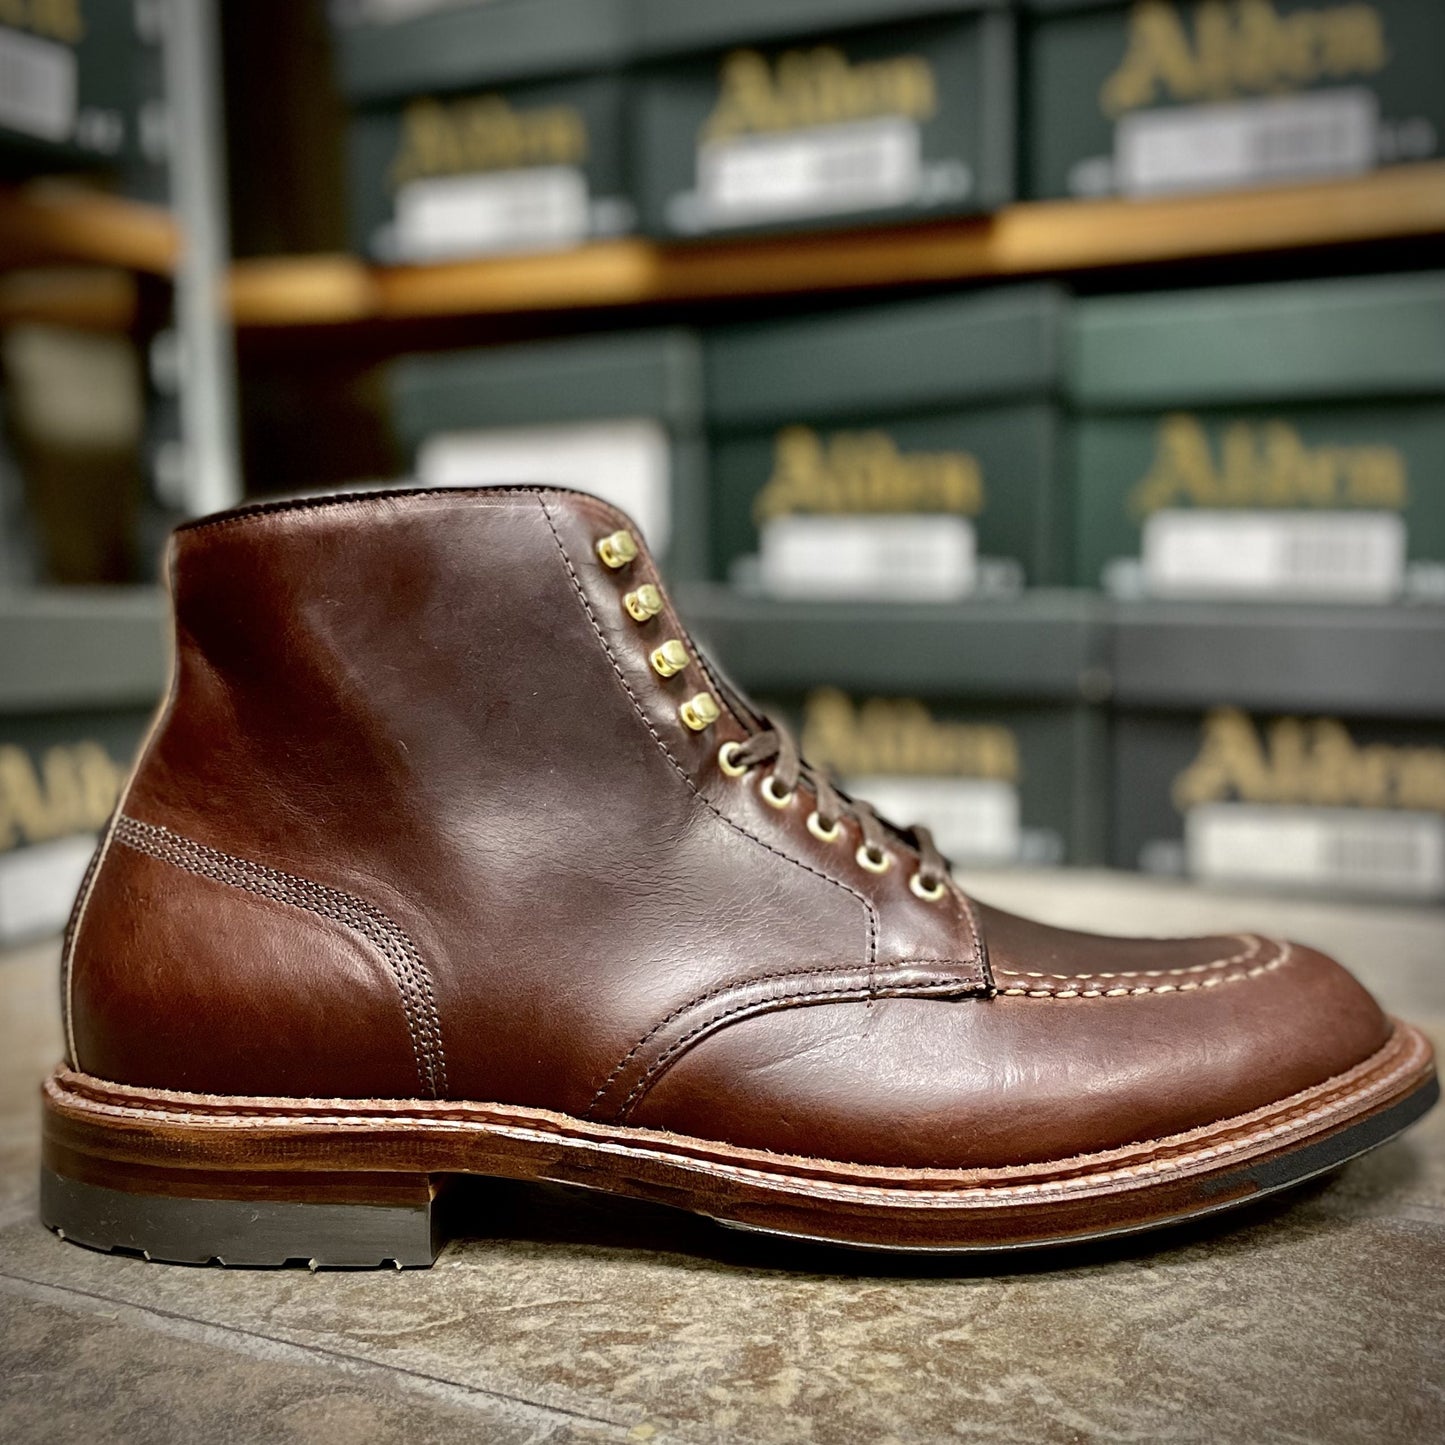 D1932HC - "Dirty Bones" Indy Boot in Brown Chromexcel (Preorder)